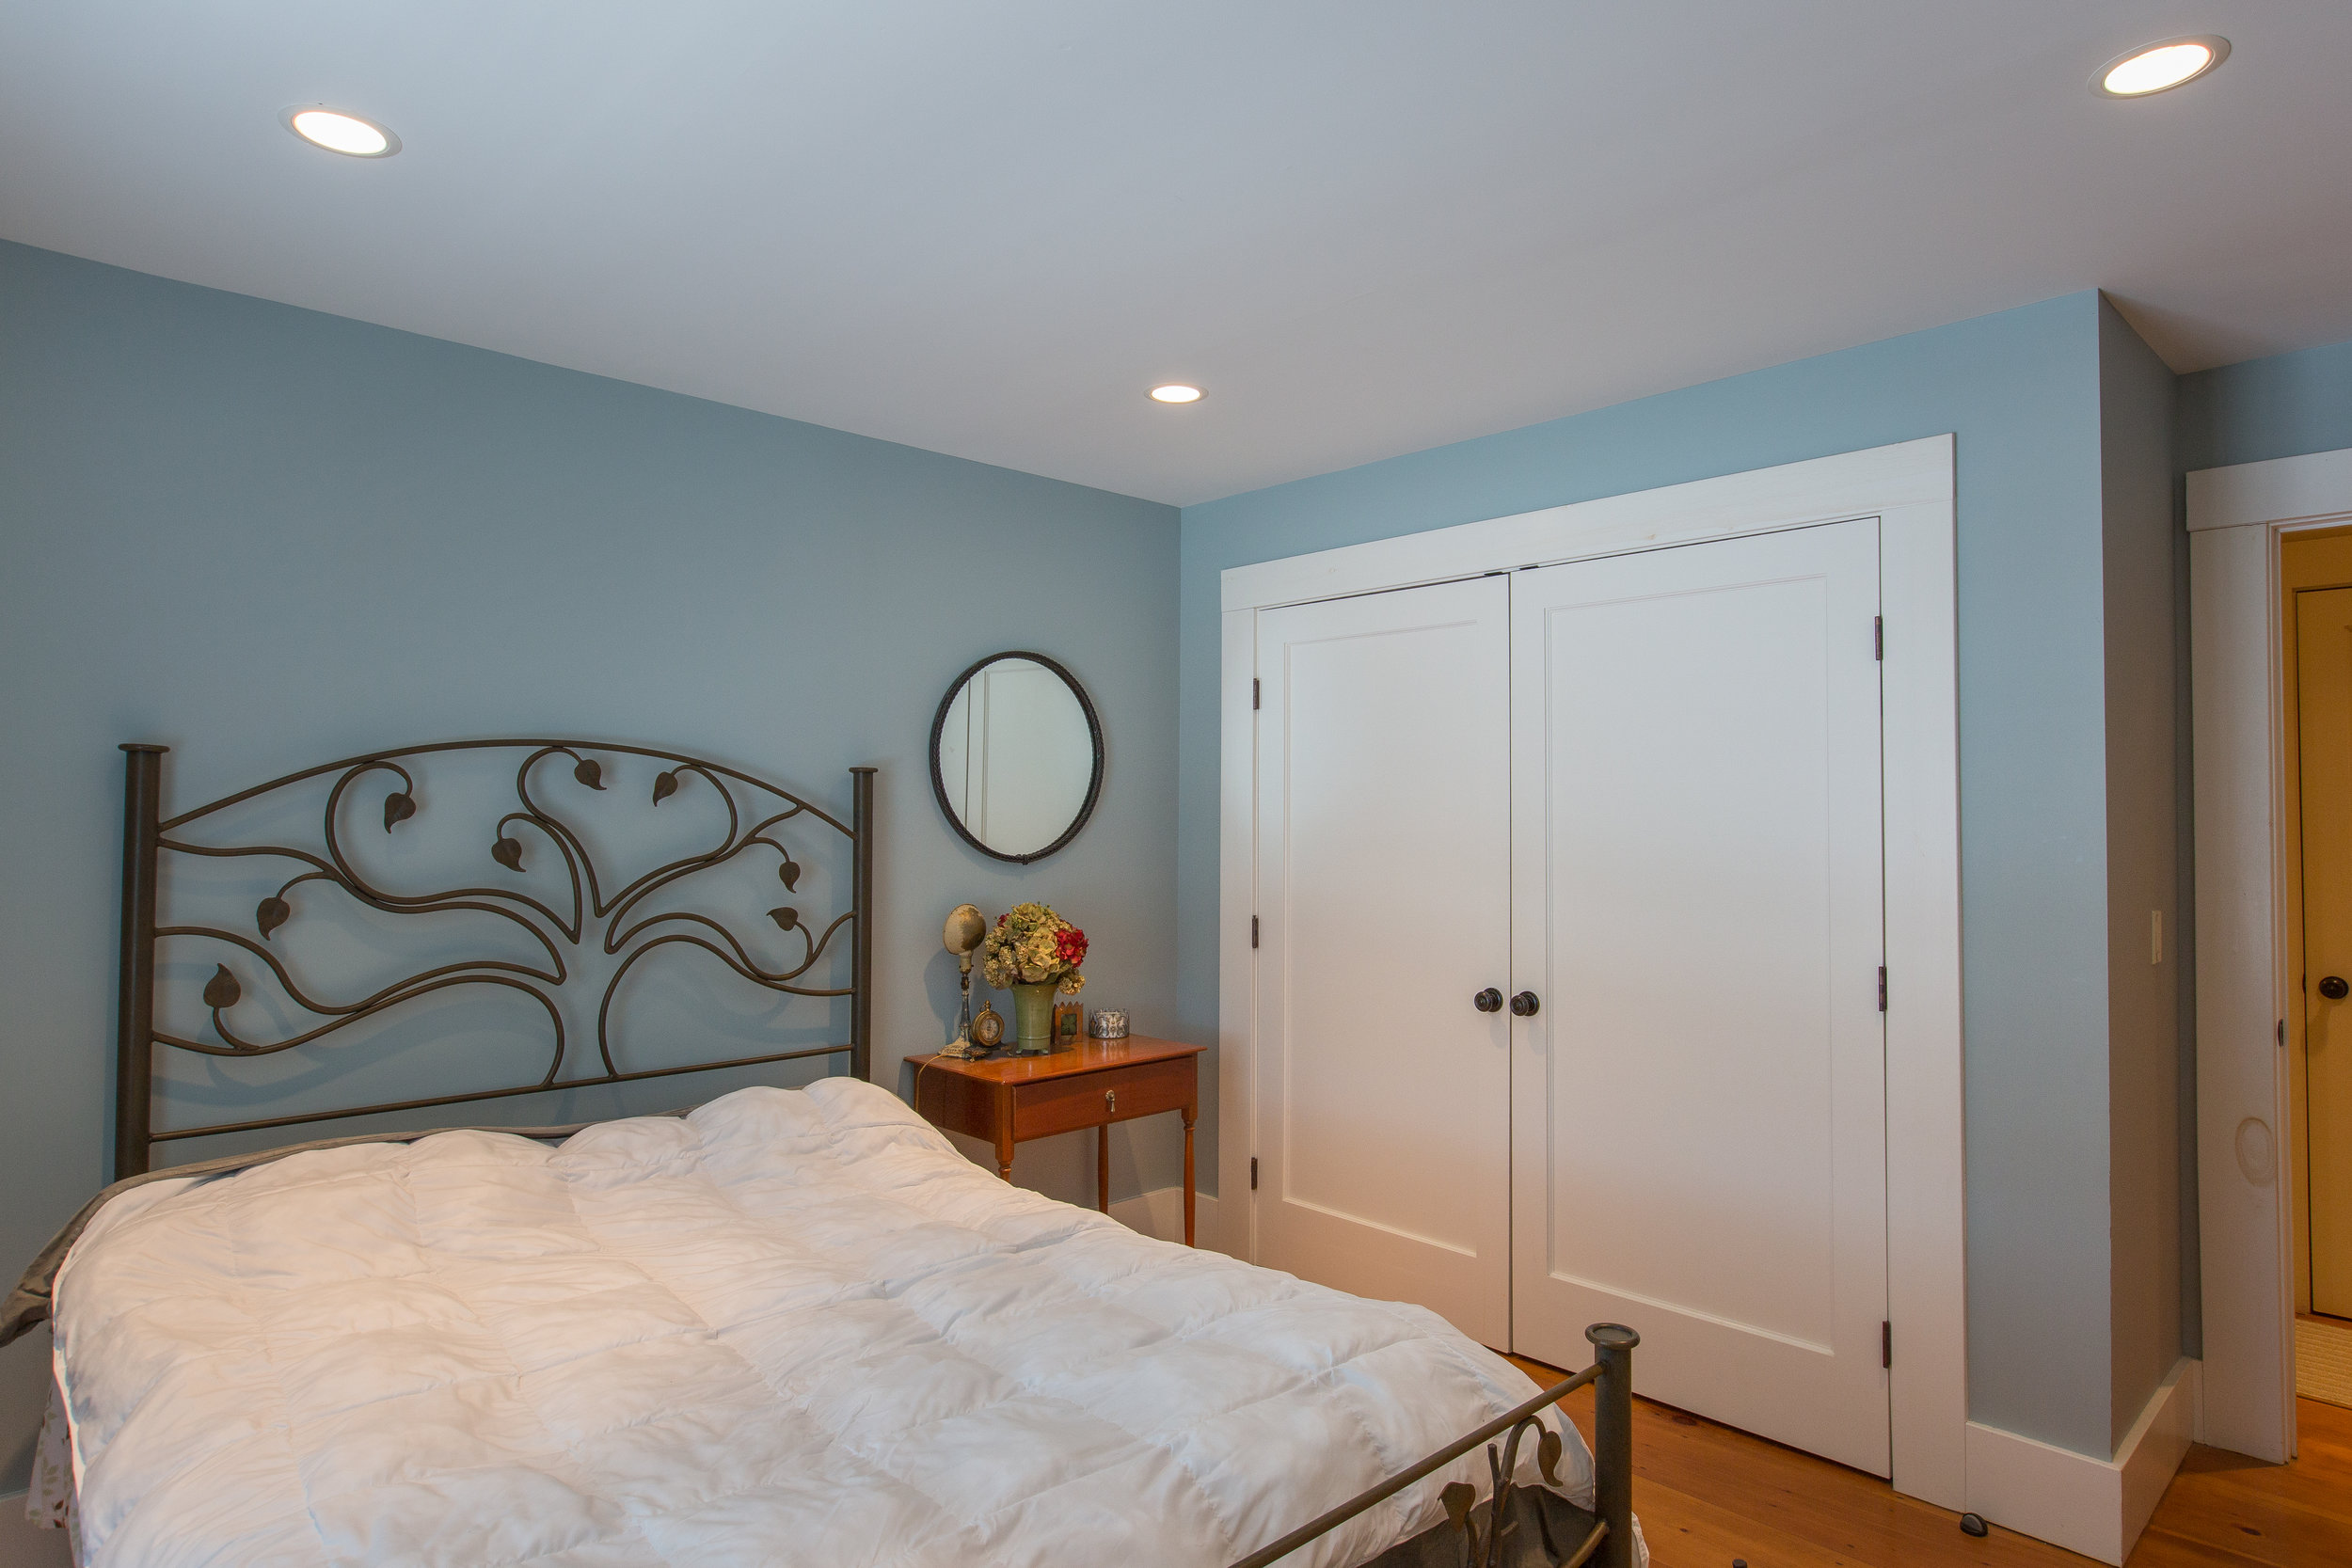  Another bedroom with bed in the center of the room and white double closet doors. Recess lighting and hardwood floors are a few features in this room 